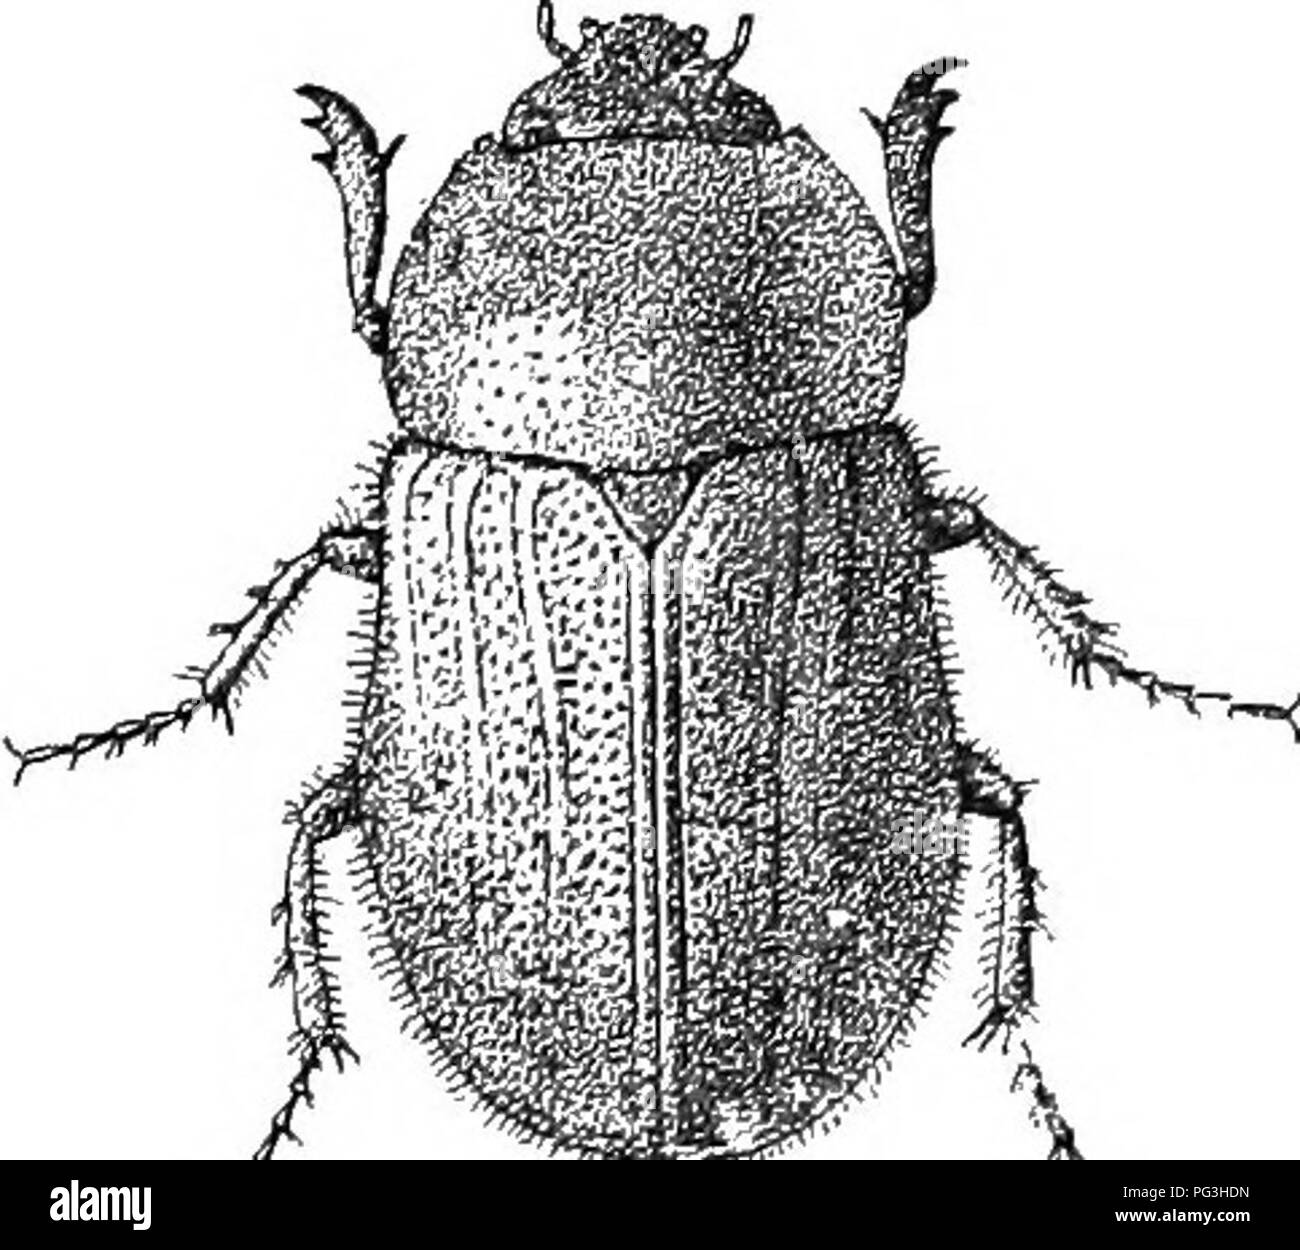 . An illustrated descriptive catalogue of the coleoptera or beetles (exclusive of the Rhynchophora) known to occur in Indiana : with bibliography and descriptions of new species . Beetles. 990 TAMELY L. SCAKAB^JB.IC. broadly rounded, hind angles rounded, surface finely and sparsely punc- tate Elytra with rows of very fine, feebly impressed punctures; the side margins in female often thickened near middle. Cylindrical elevation of prosternum behind the front coxas distinctly visible when viewed from the front. Length 12-14.5 mm. Vigo, Putnam and Posey counties; scarce. May ]2-July 30. 1849 {5S( Stock Photo